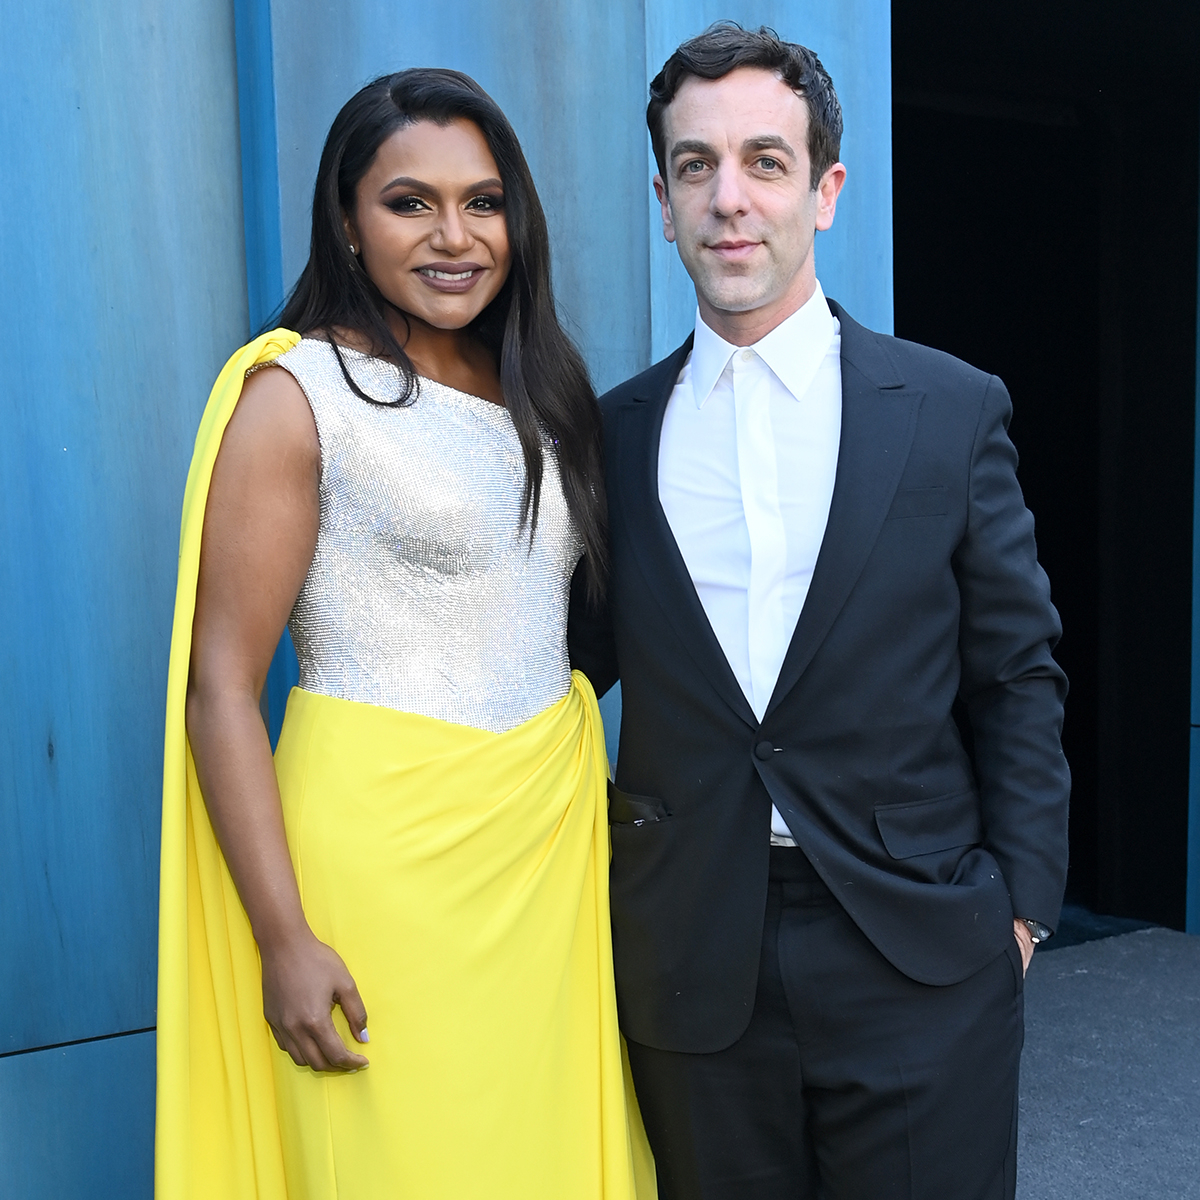 B. J. Novak Says He and Mindy Kaling Were “Reckless Idiots” During Past Romance – E! Online